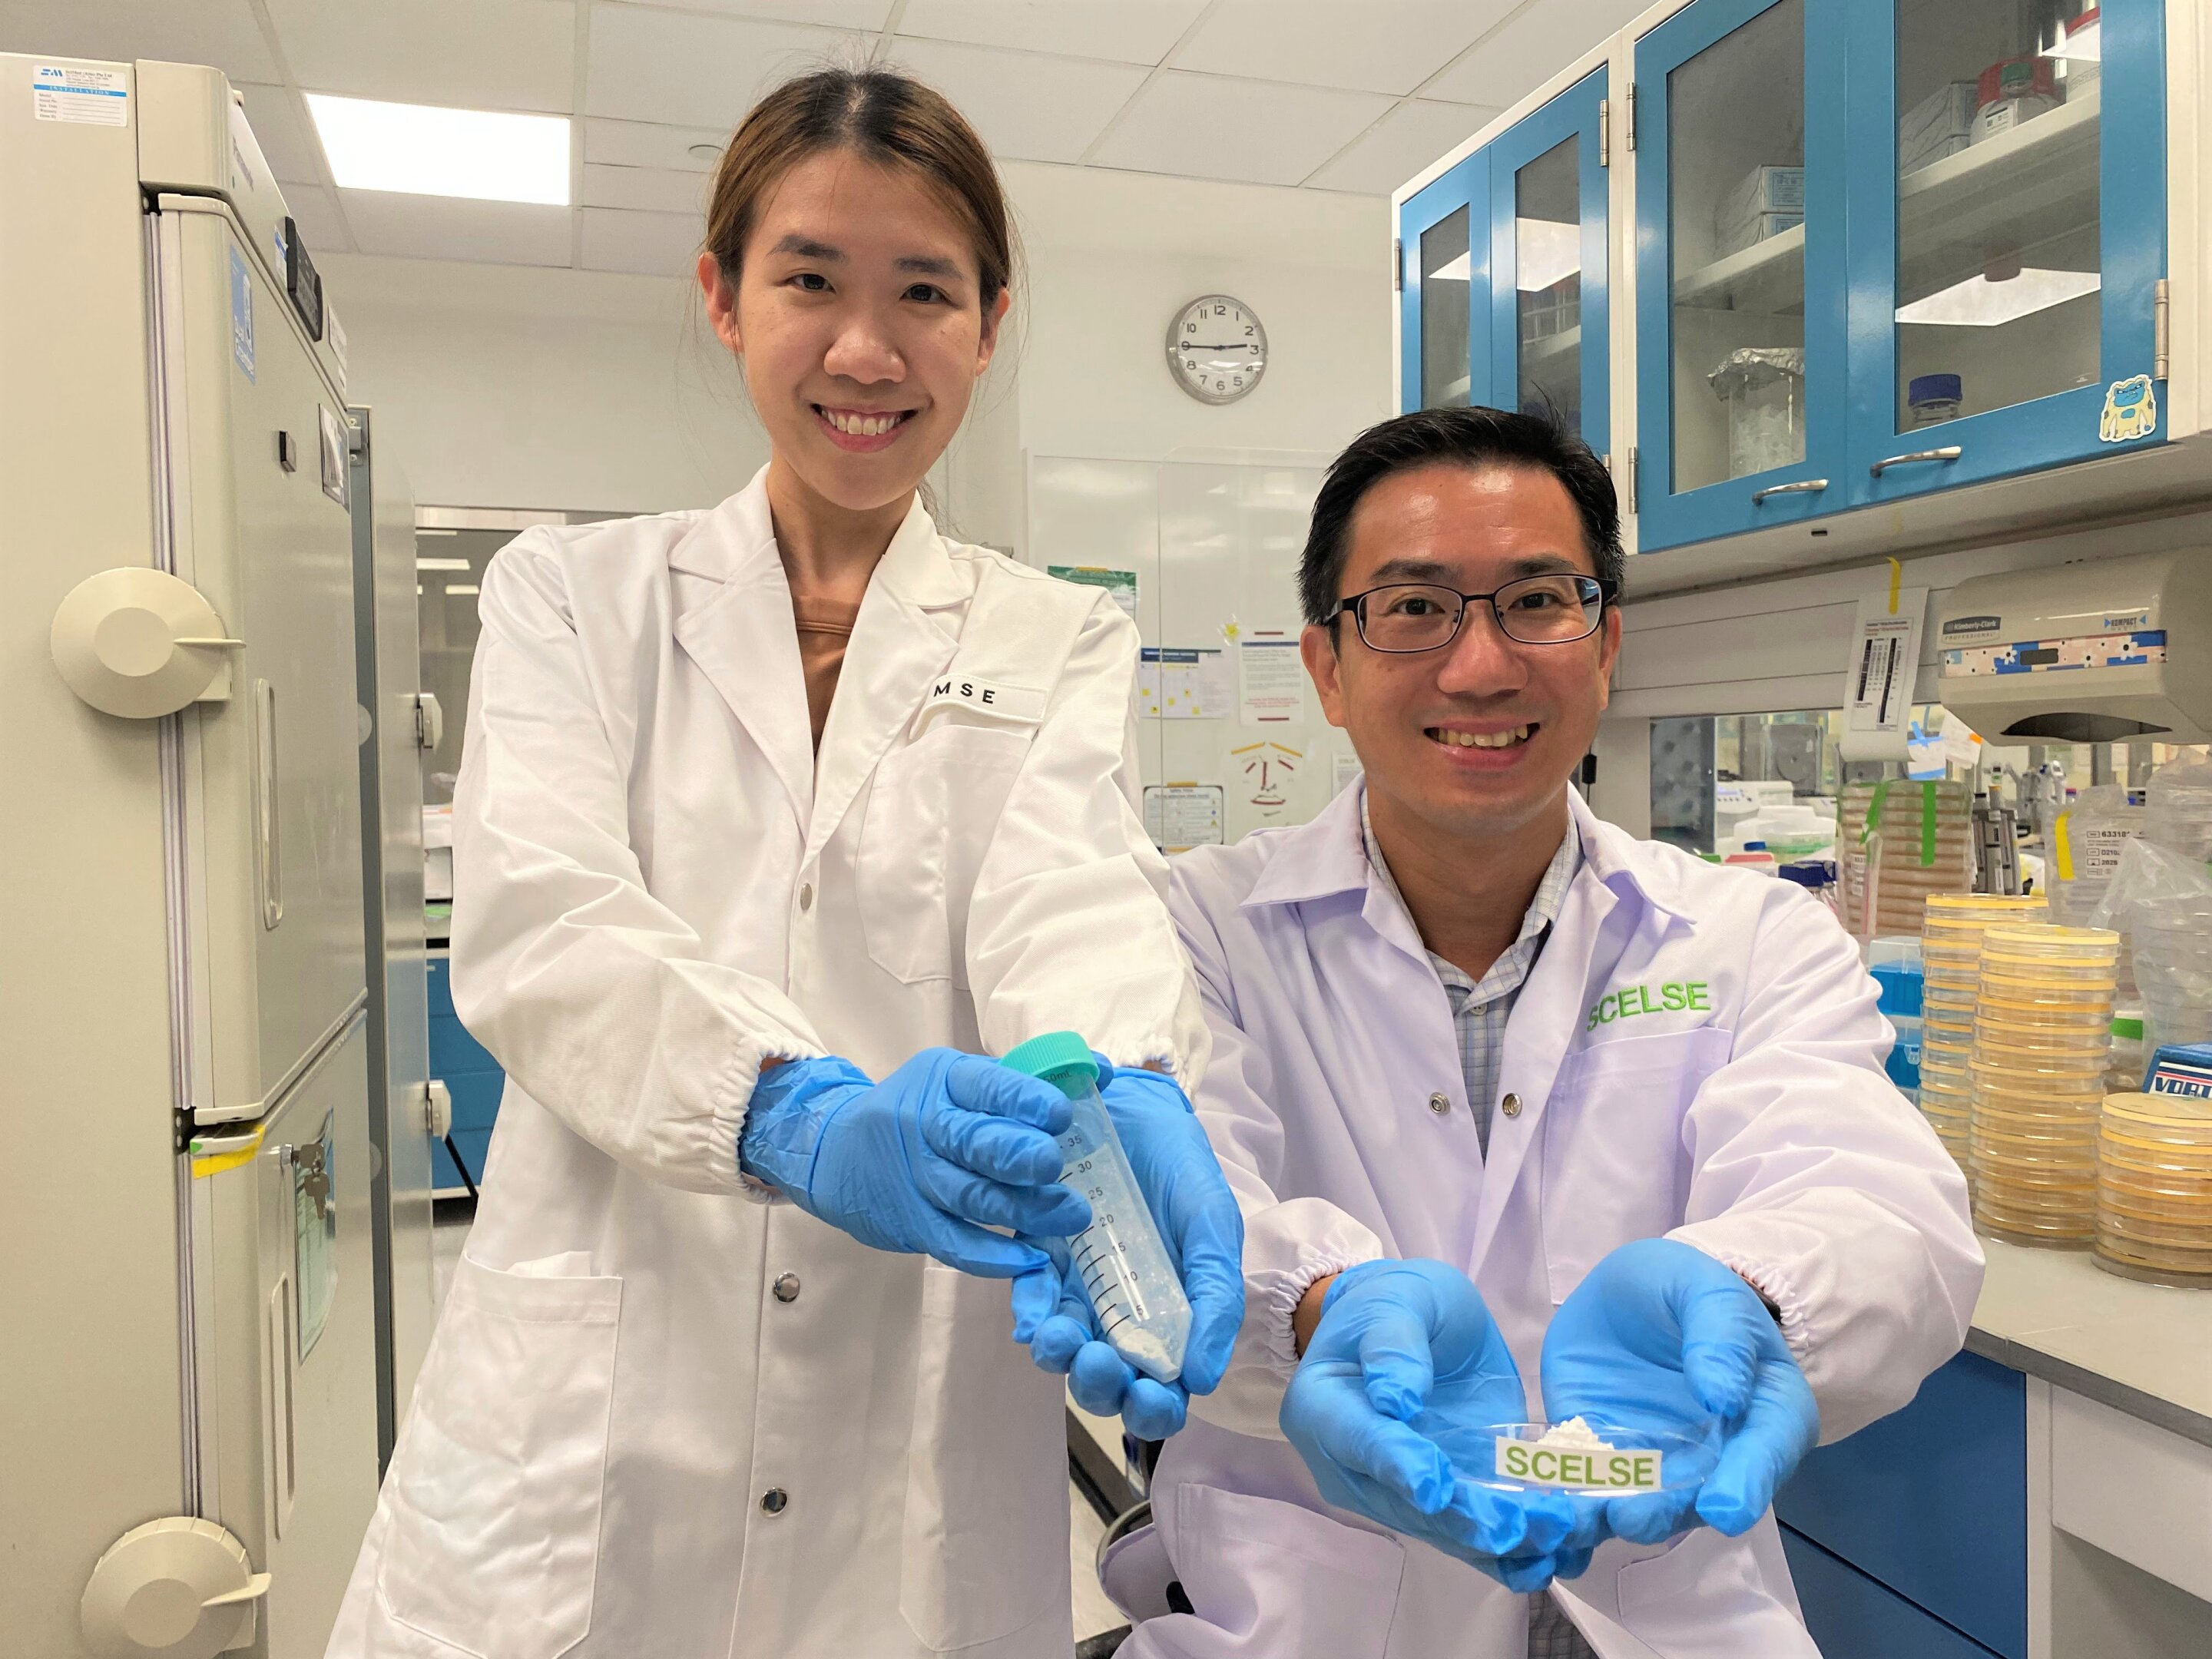 #Scientists develop coated probiotics that could be effectively delivered into the human gut